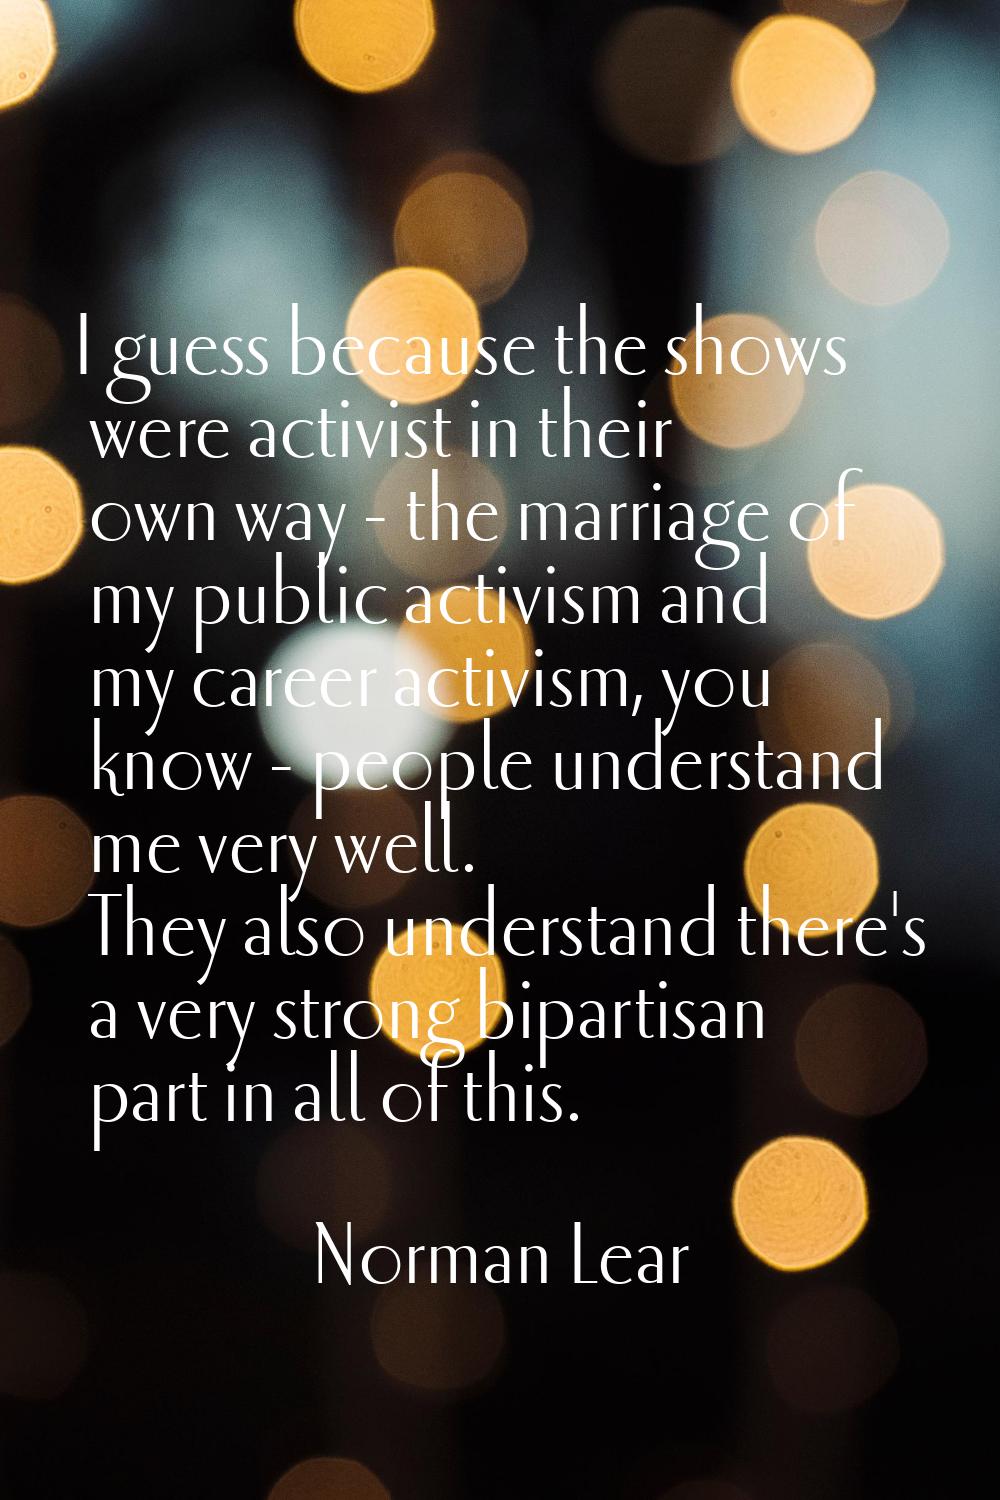 I guess because the shows were activist in their own way - the marriage of my public activism and m